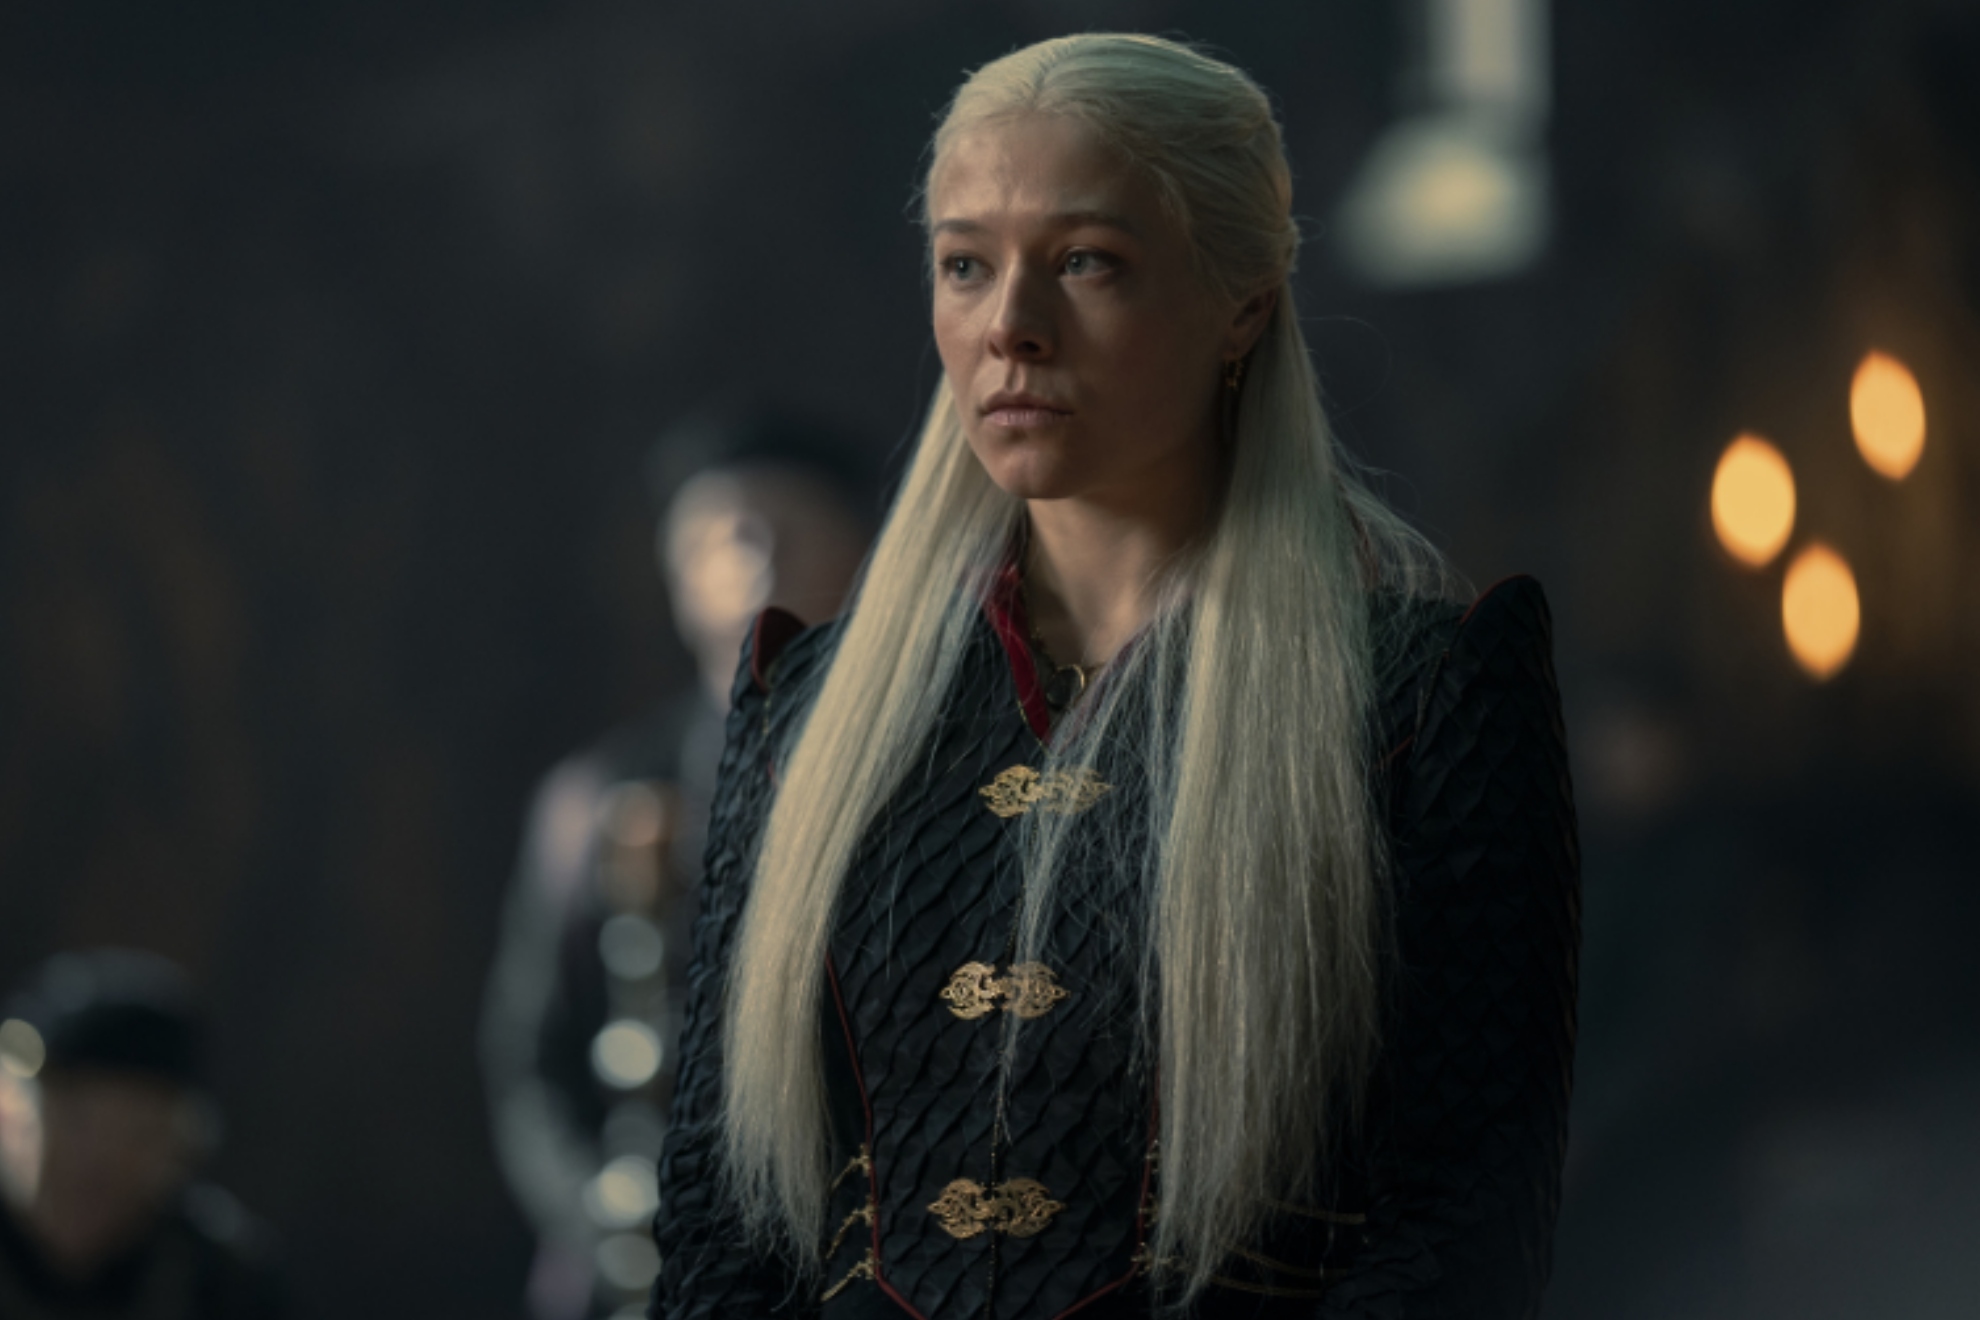 The House of the Dragon season finale leaked online, HBO claims it is aggressively monitoring the source